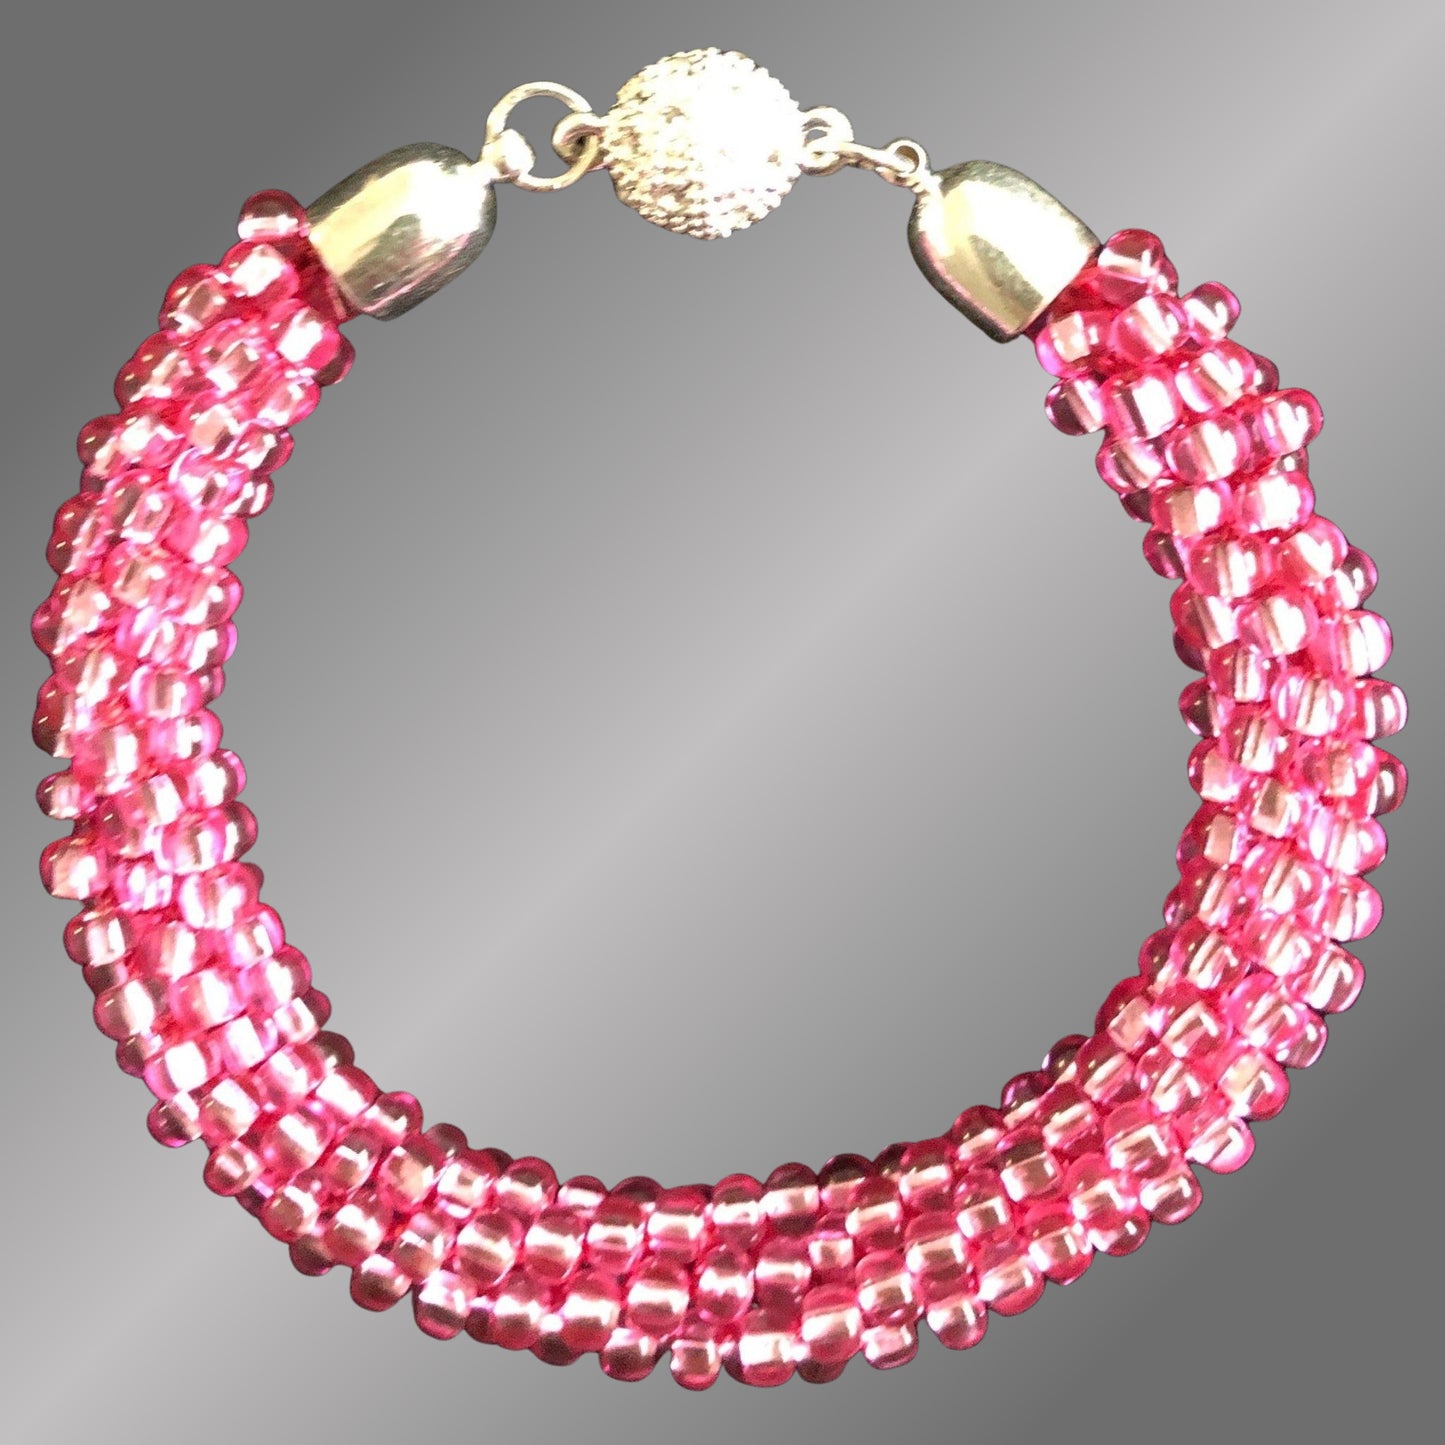 Another view of Pink Beaded Bracelet with magnetic clasp